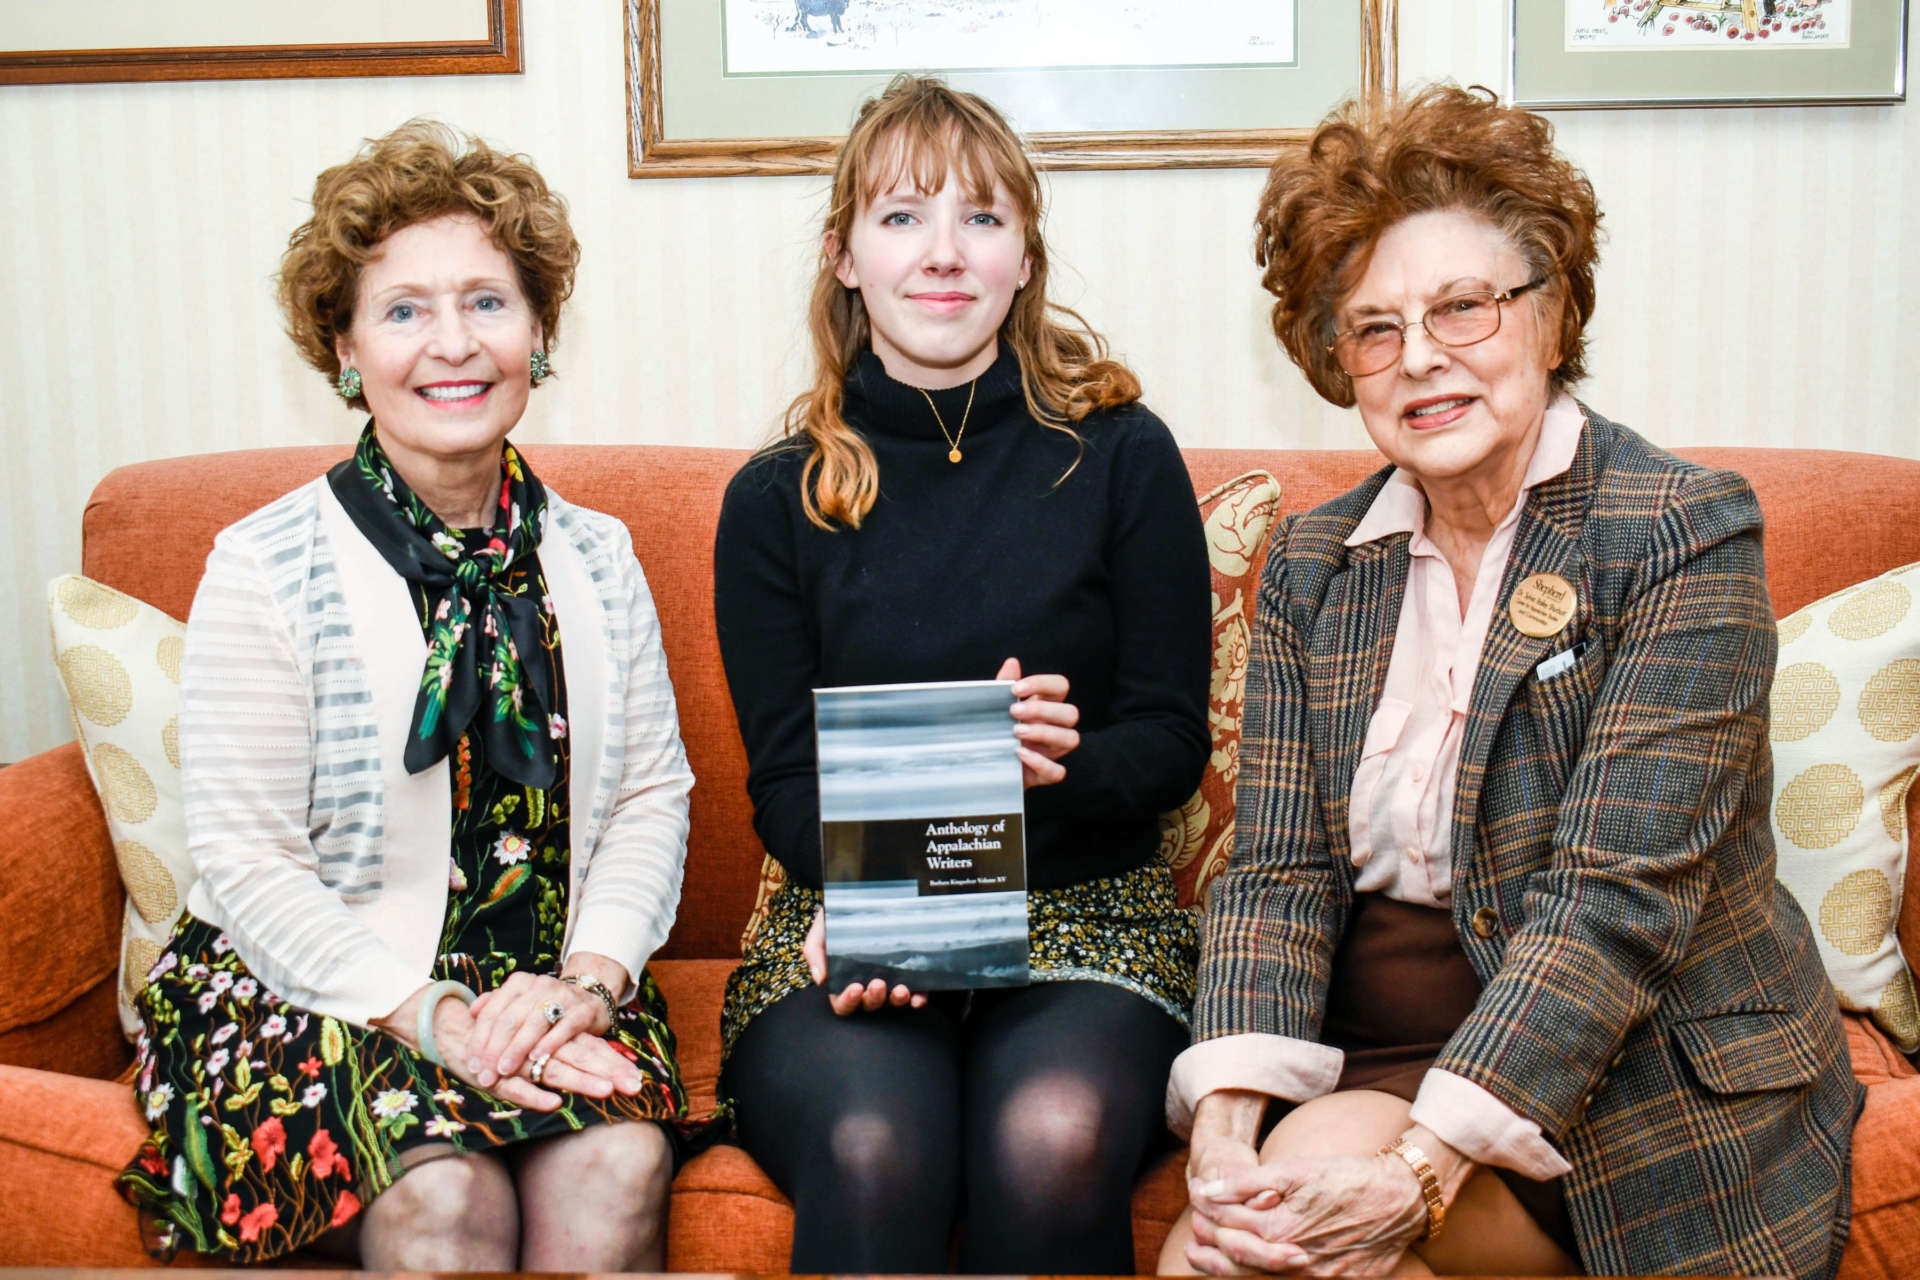 Photo of Dr. Mary J.C. Hendrix, Noche Gauthier, and Dr. Sylvia Bailey Shurbutt sitting on couch in president's office, Noche holding Anthology book.